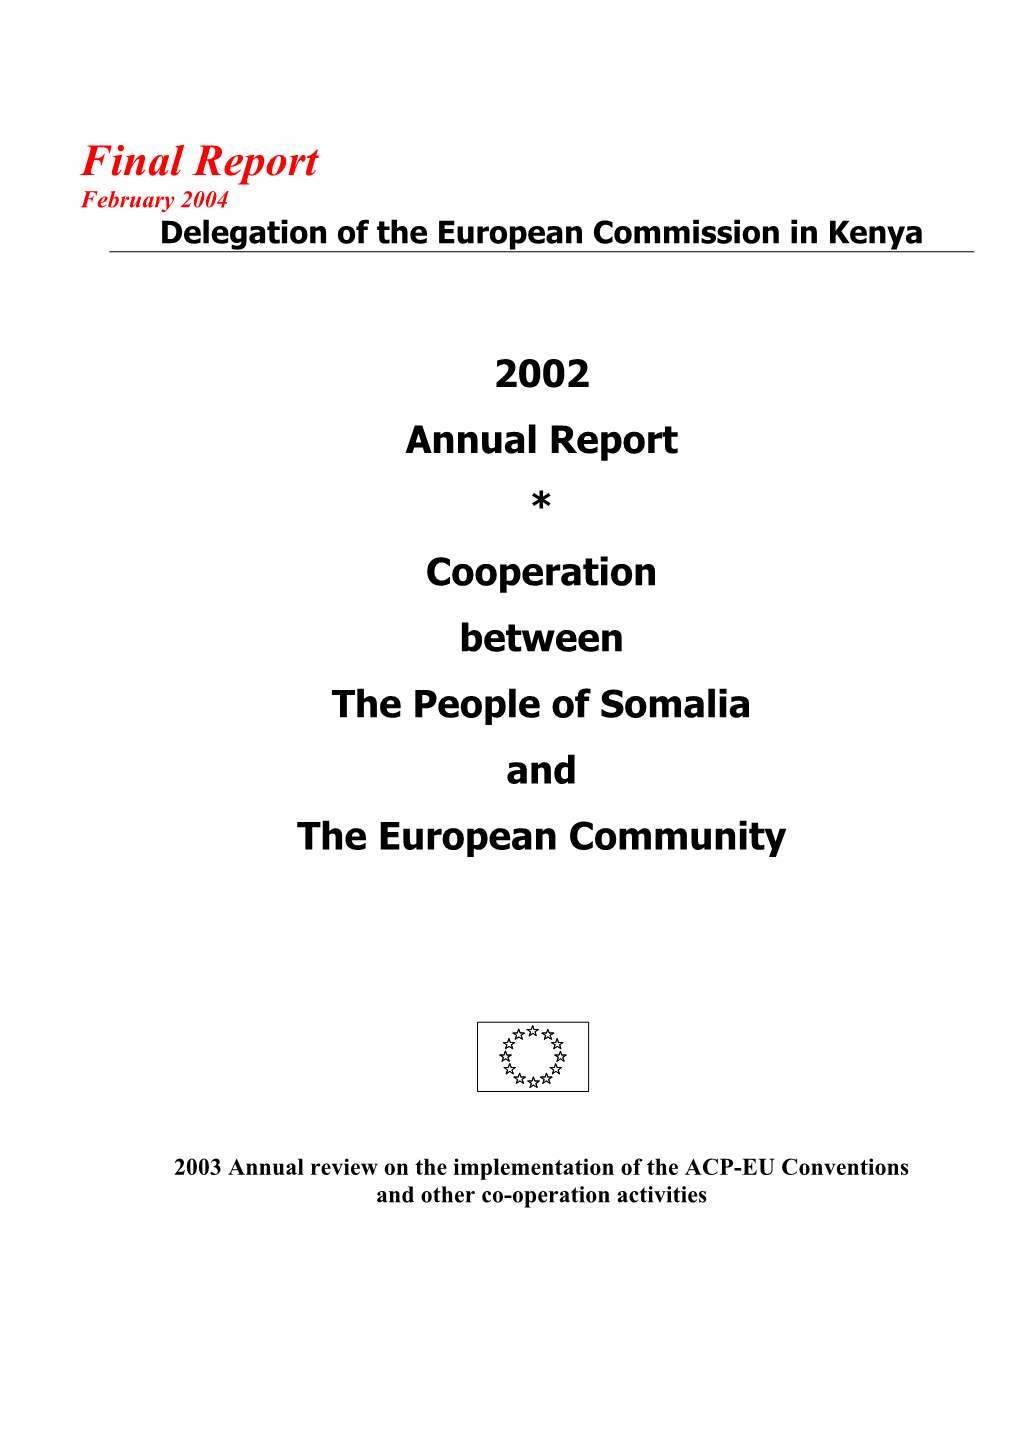 Final Report February 2004 Delegation of the European Commission in Kenya